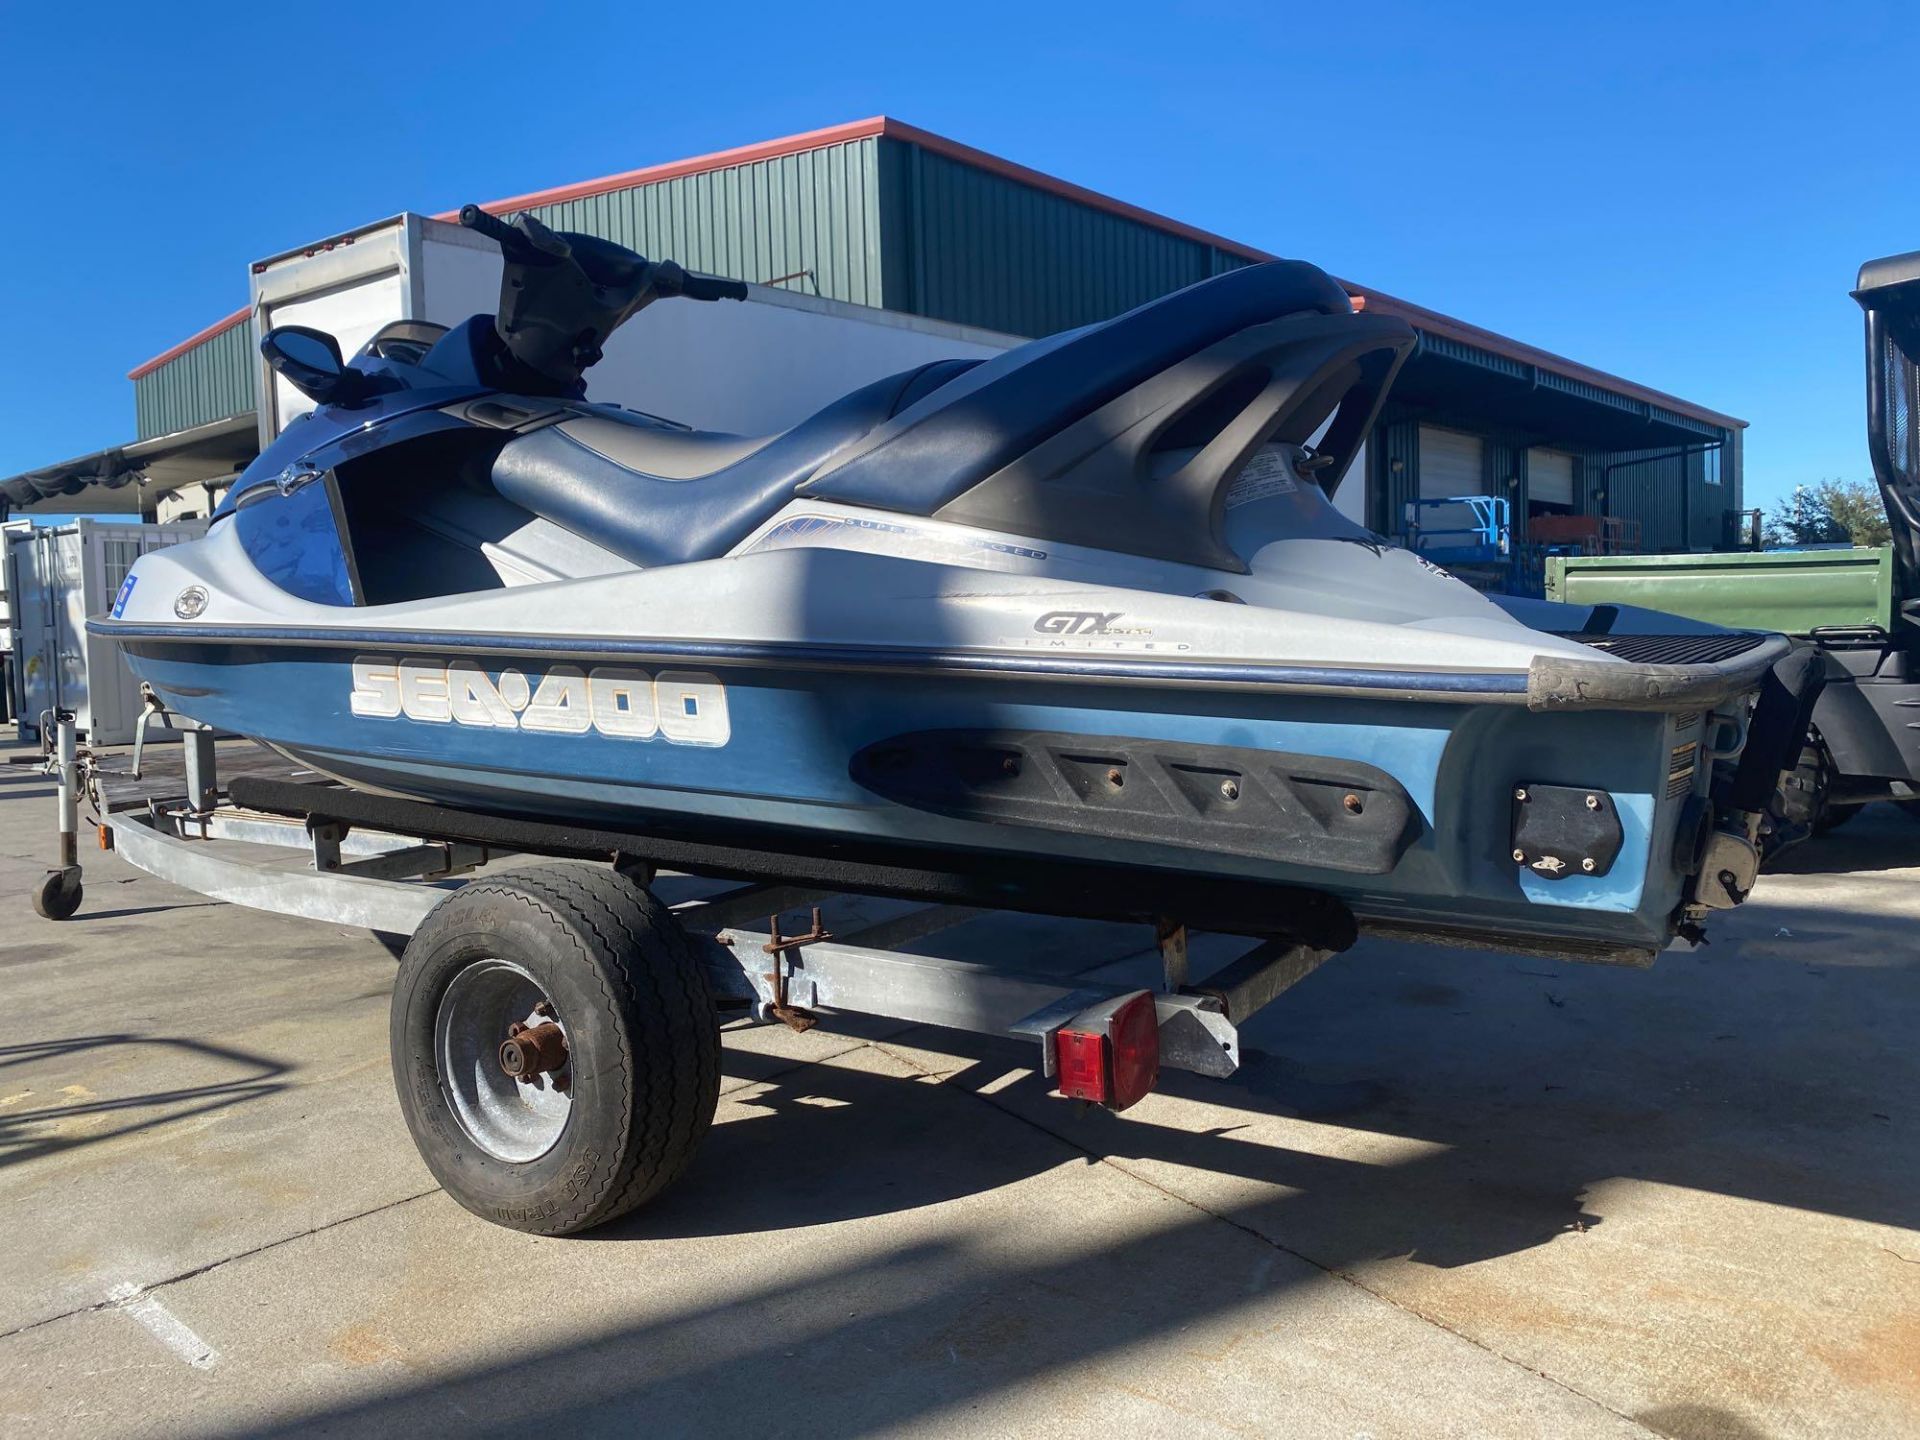 2004 SEADOO GTI WAVE RUNNER WITH TRAILER, UPDATED EXHAUST, UPDATED INTAKE MANIFOLD, UPDATED IMPELLER - Image 3 of 9